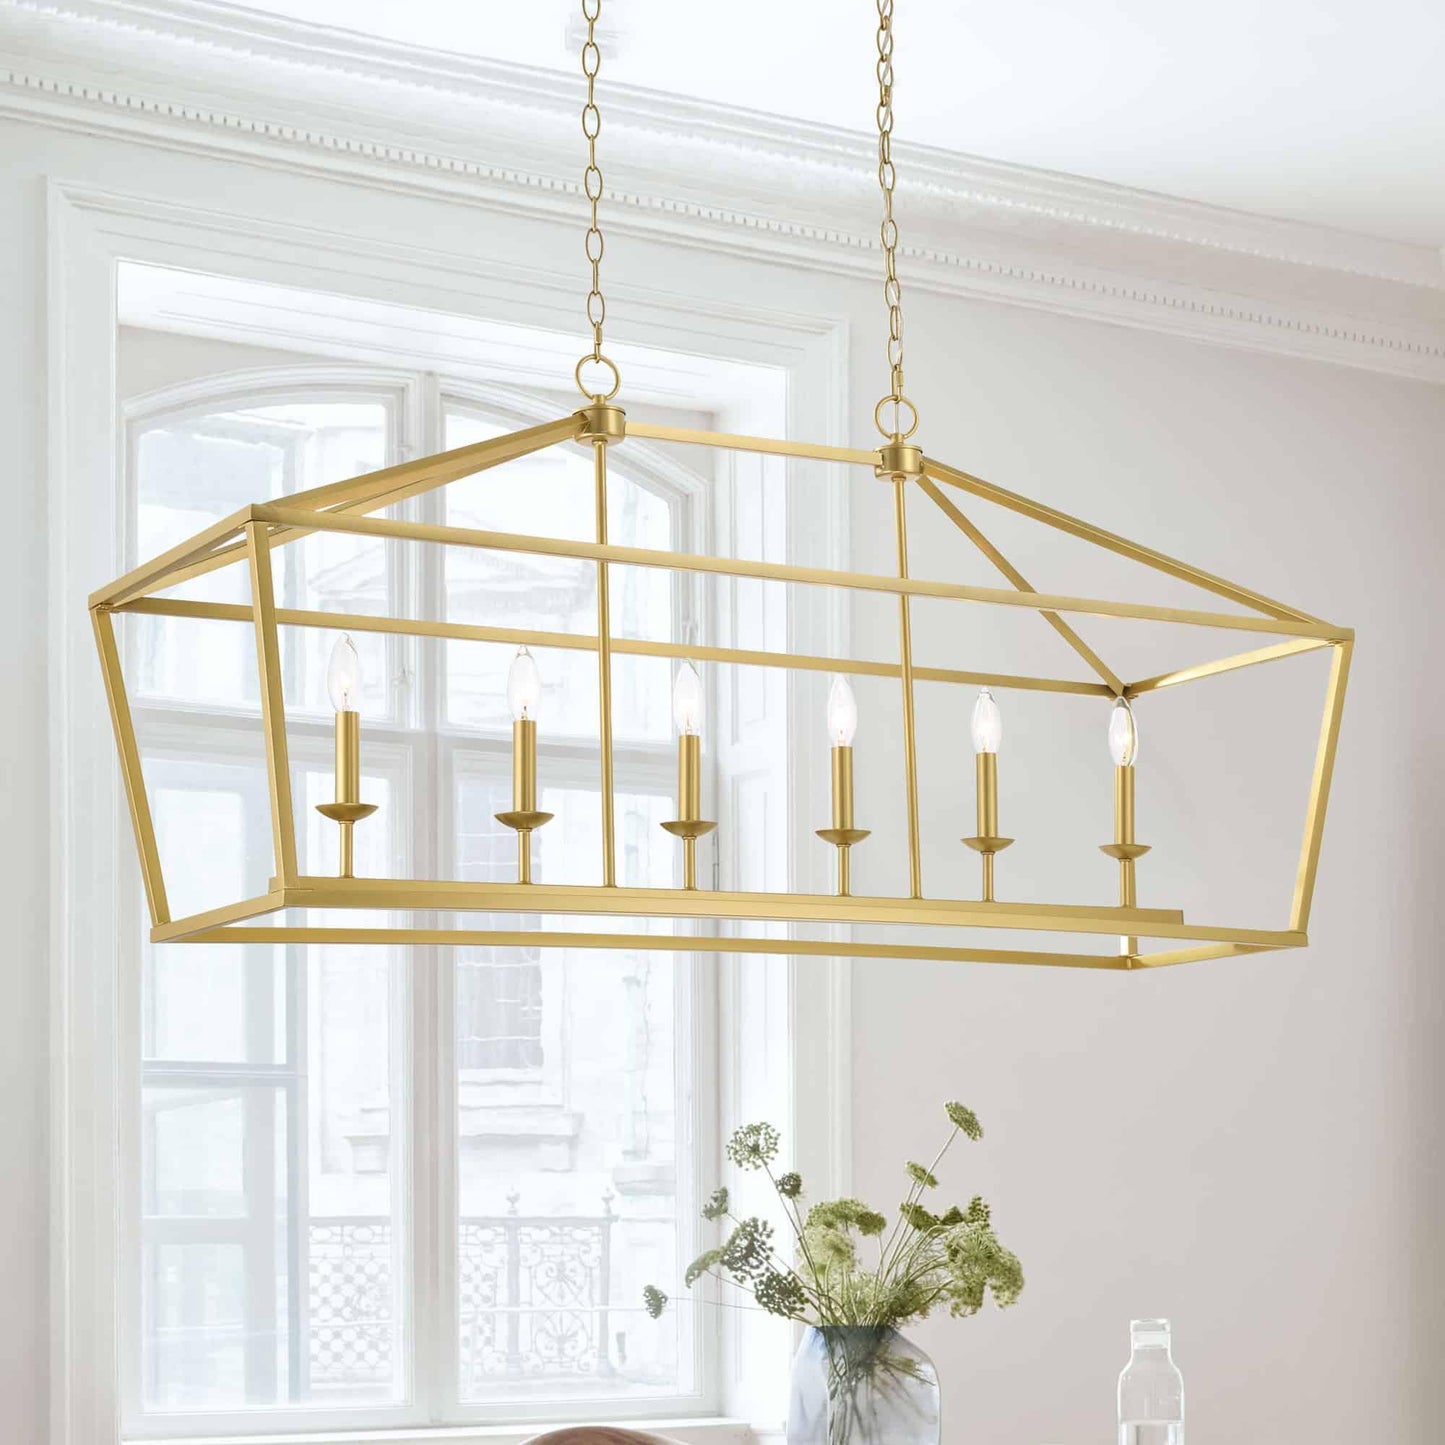 6 light linear kitchen island chandelier (20) by ACROMA